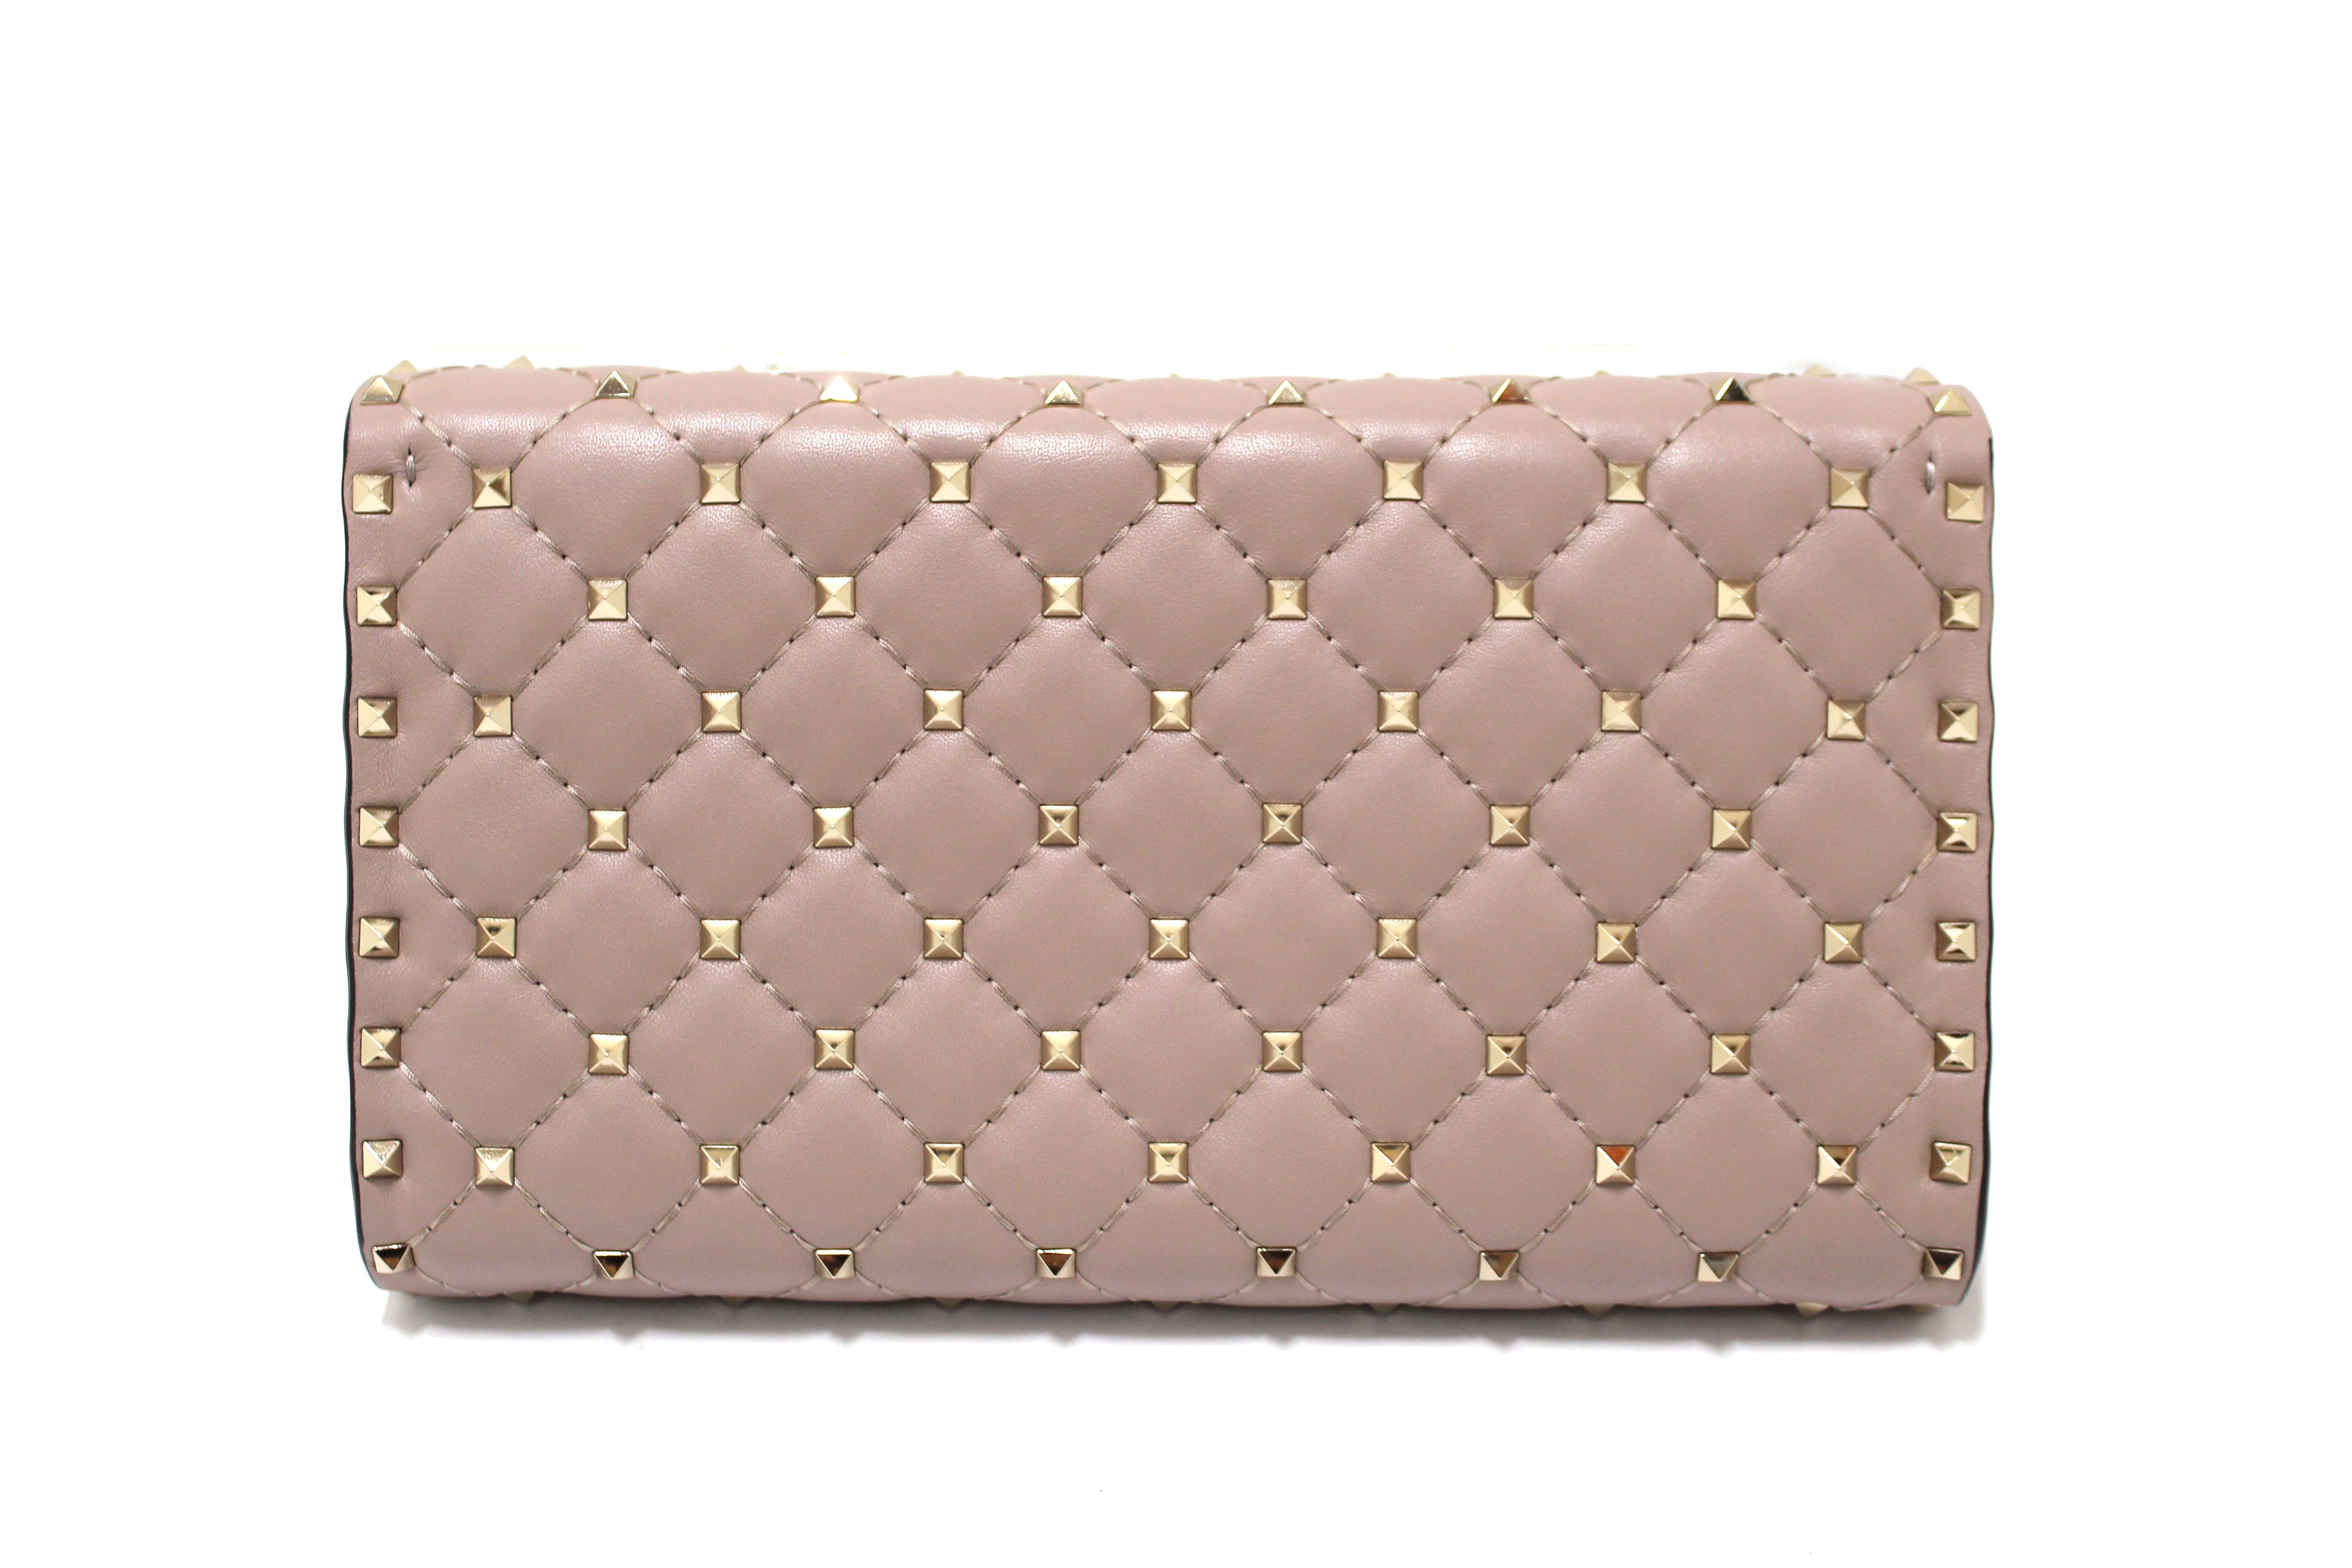 Authentic Valentino Garavani Poudre Quilted Nappa Leather Rockstud Spike Crossbody Clutch Bag